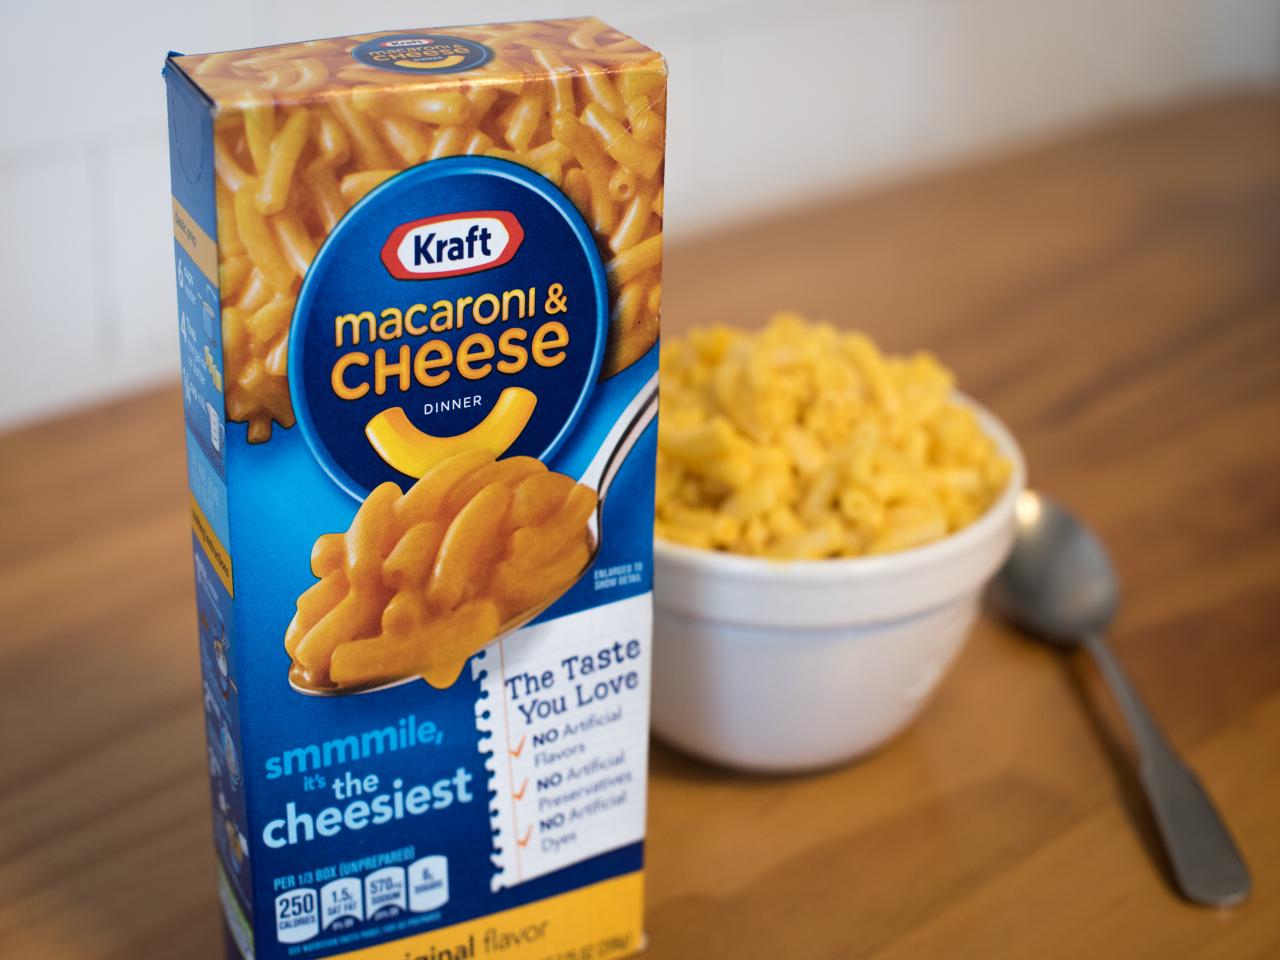 Who Eats the Most Kraft Mac & Cheese?, FN Dish - Behind-the-Scenes, Food  Trends, and Best Recipes : Food Network